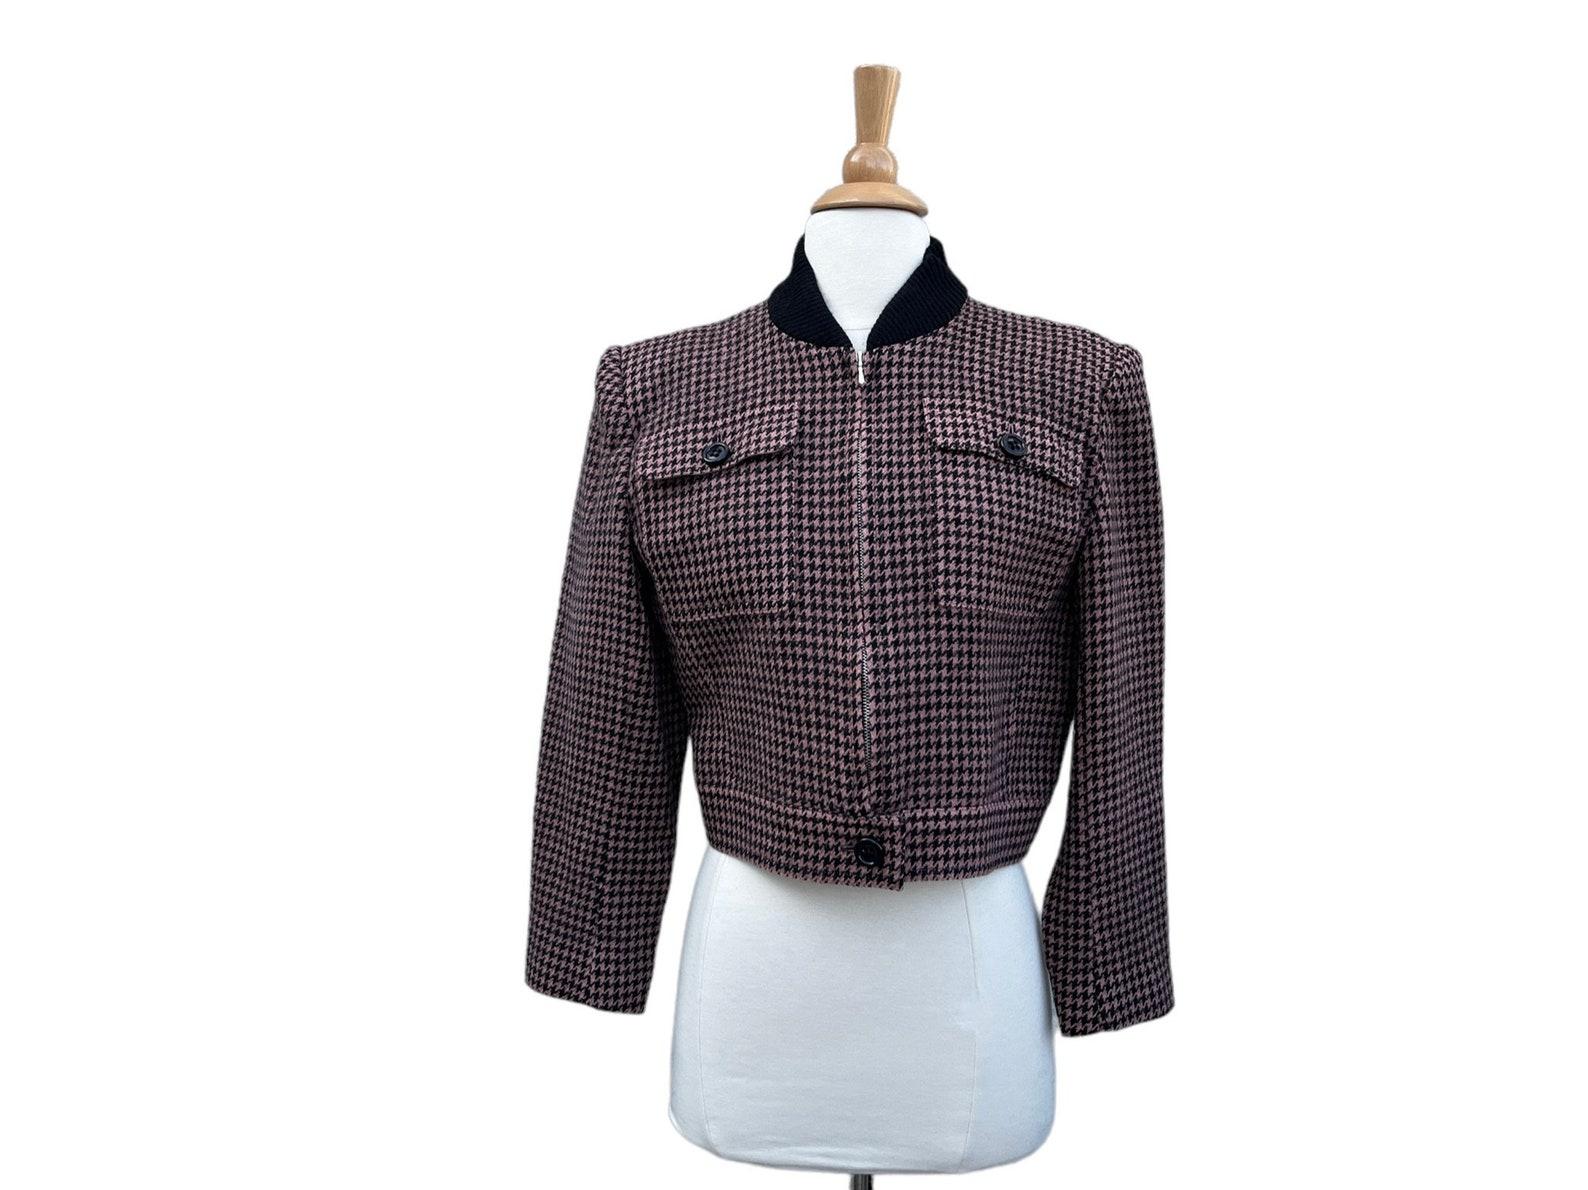 Guy Laroche Houndstooth Jacket, Circa 1980s In Good Condition For Sale In Brooklyn, NY